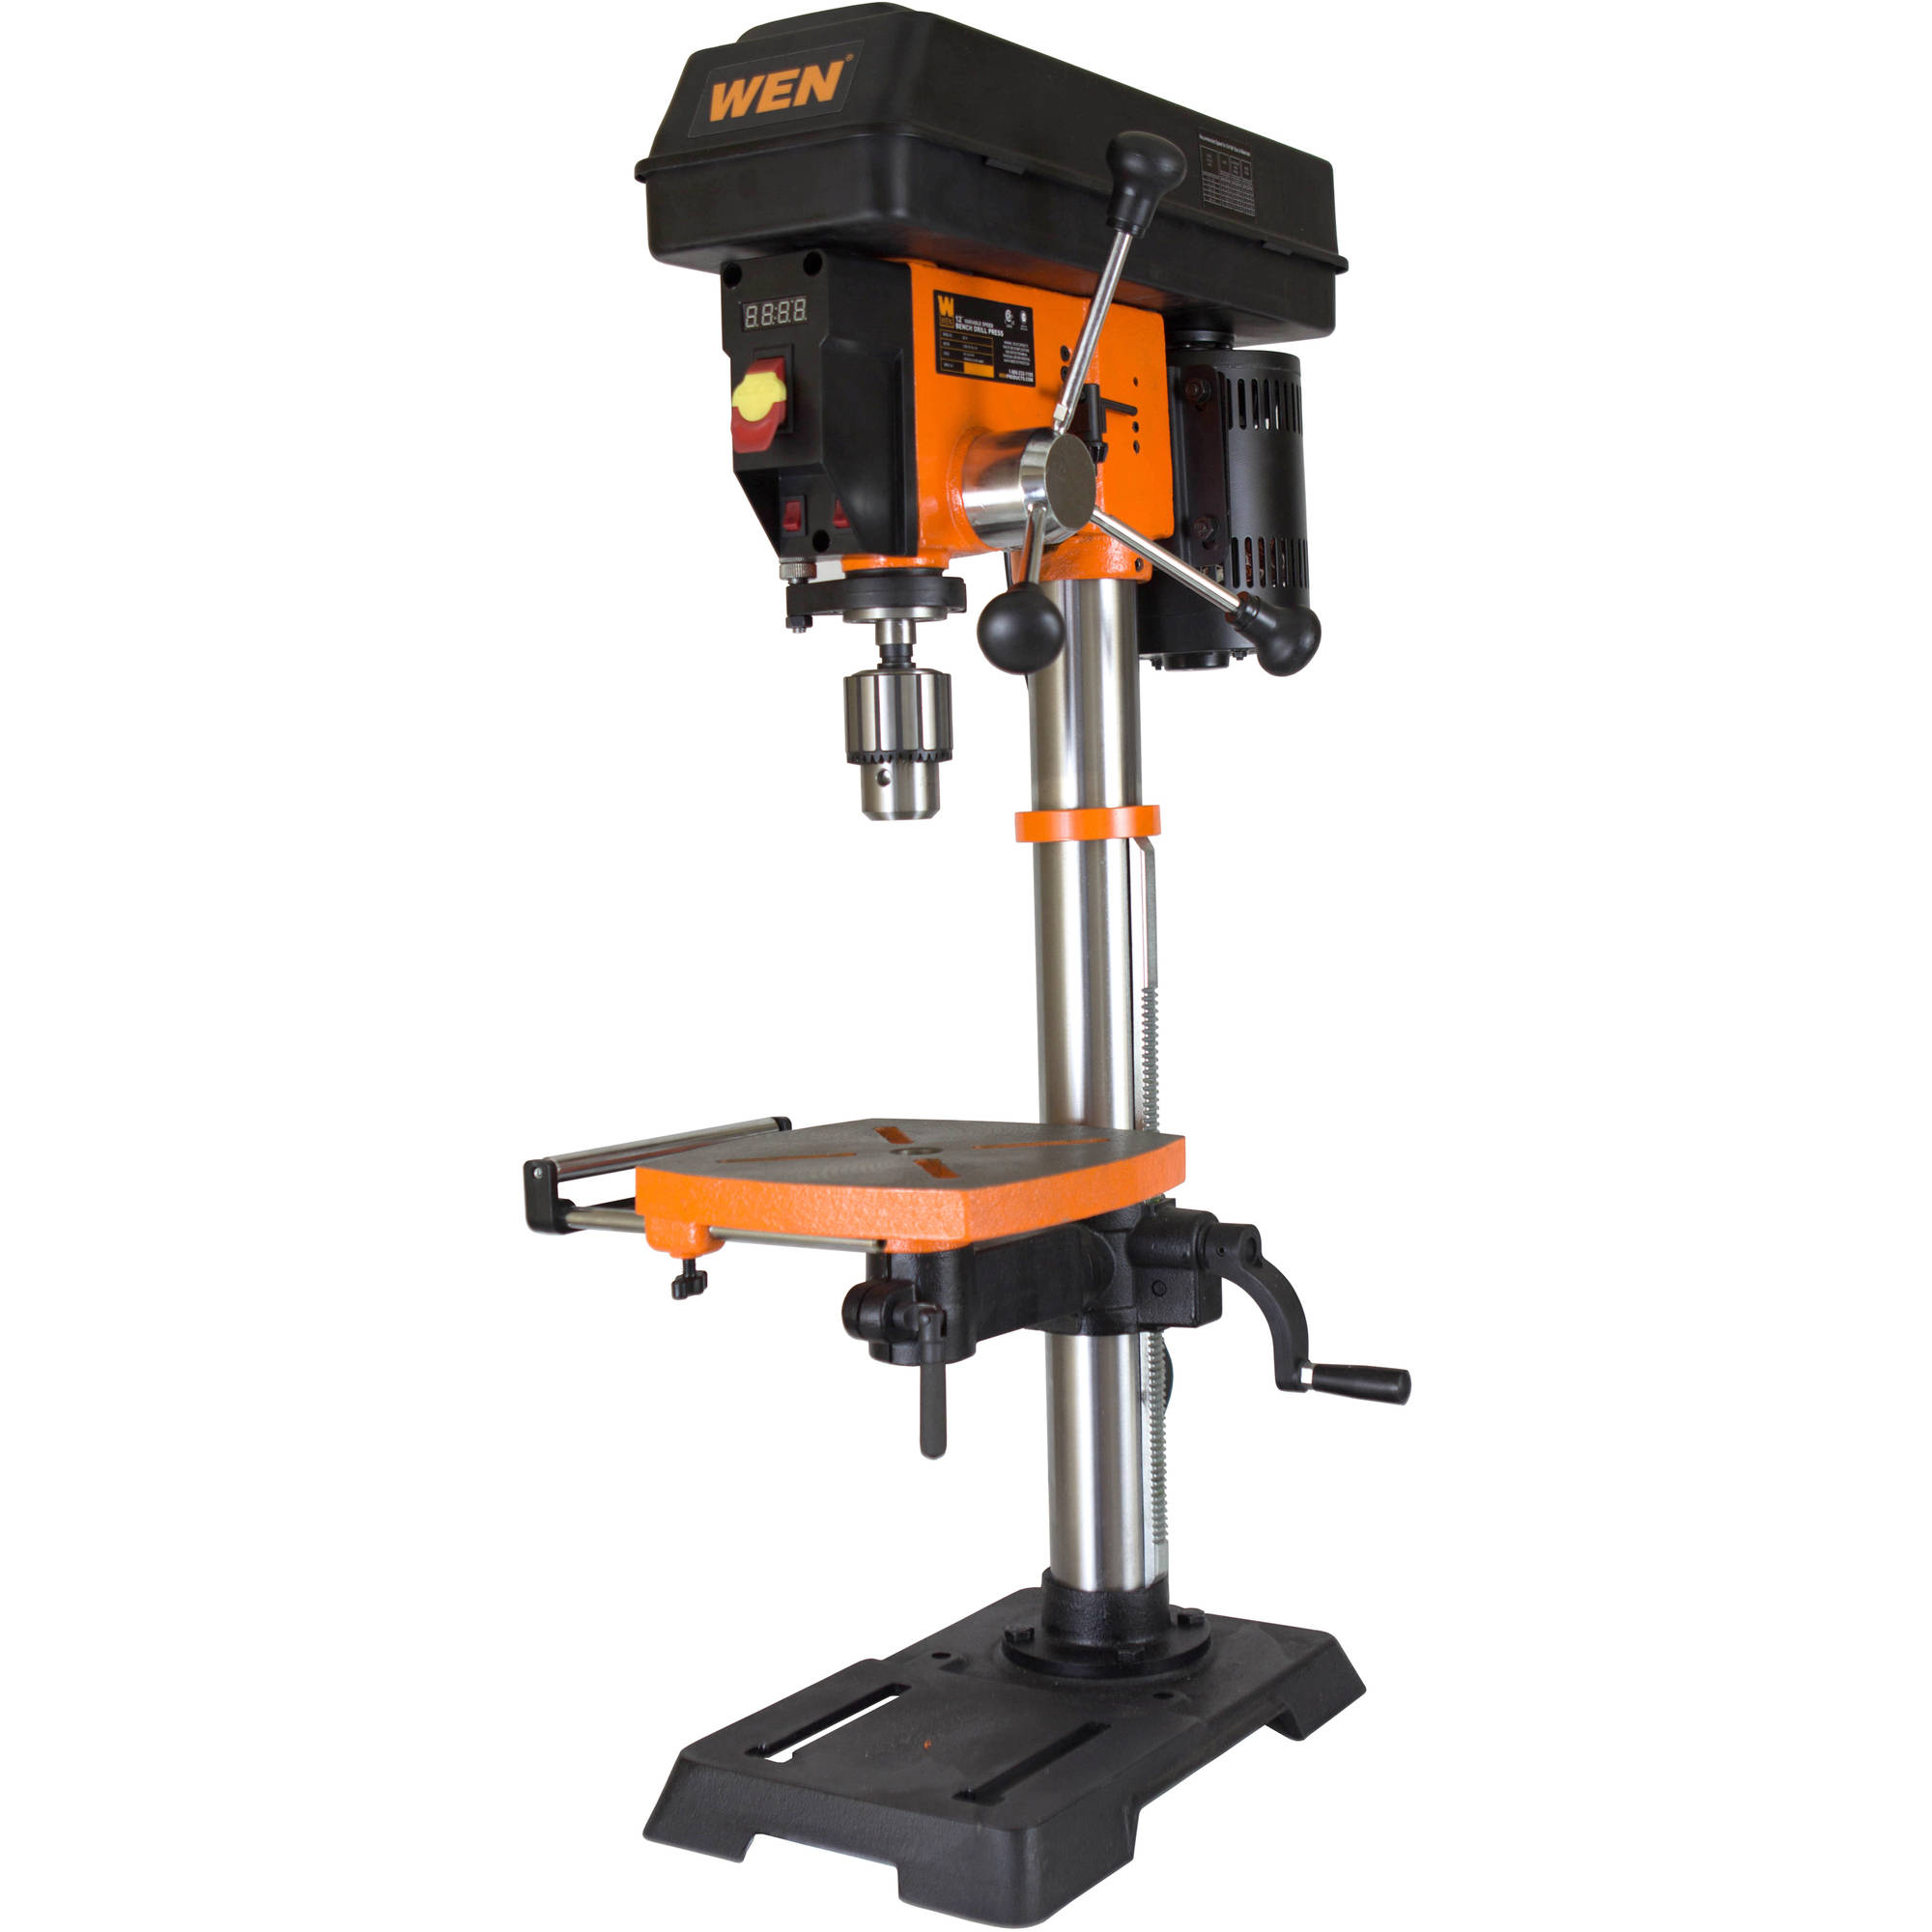 WEN 5-Amp 12-Inch Variable Speed Cast Iron Benchtop Drill Press with Laser and Work Light - image 2 of 6